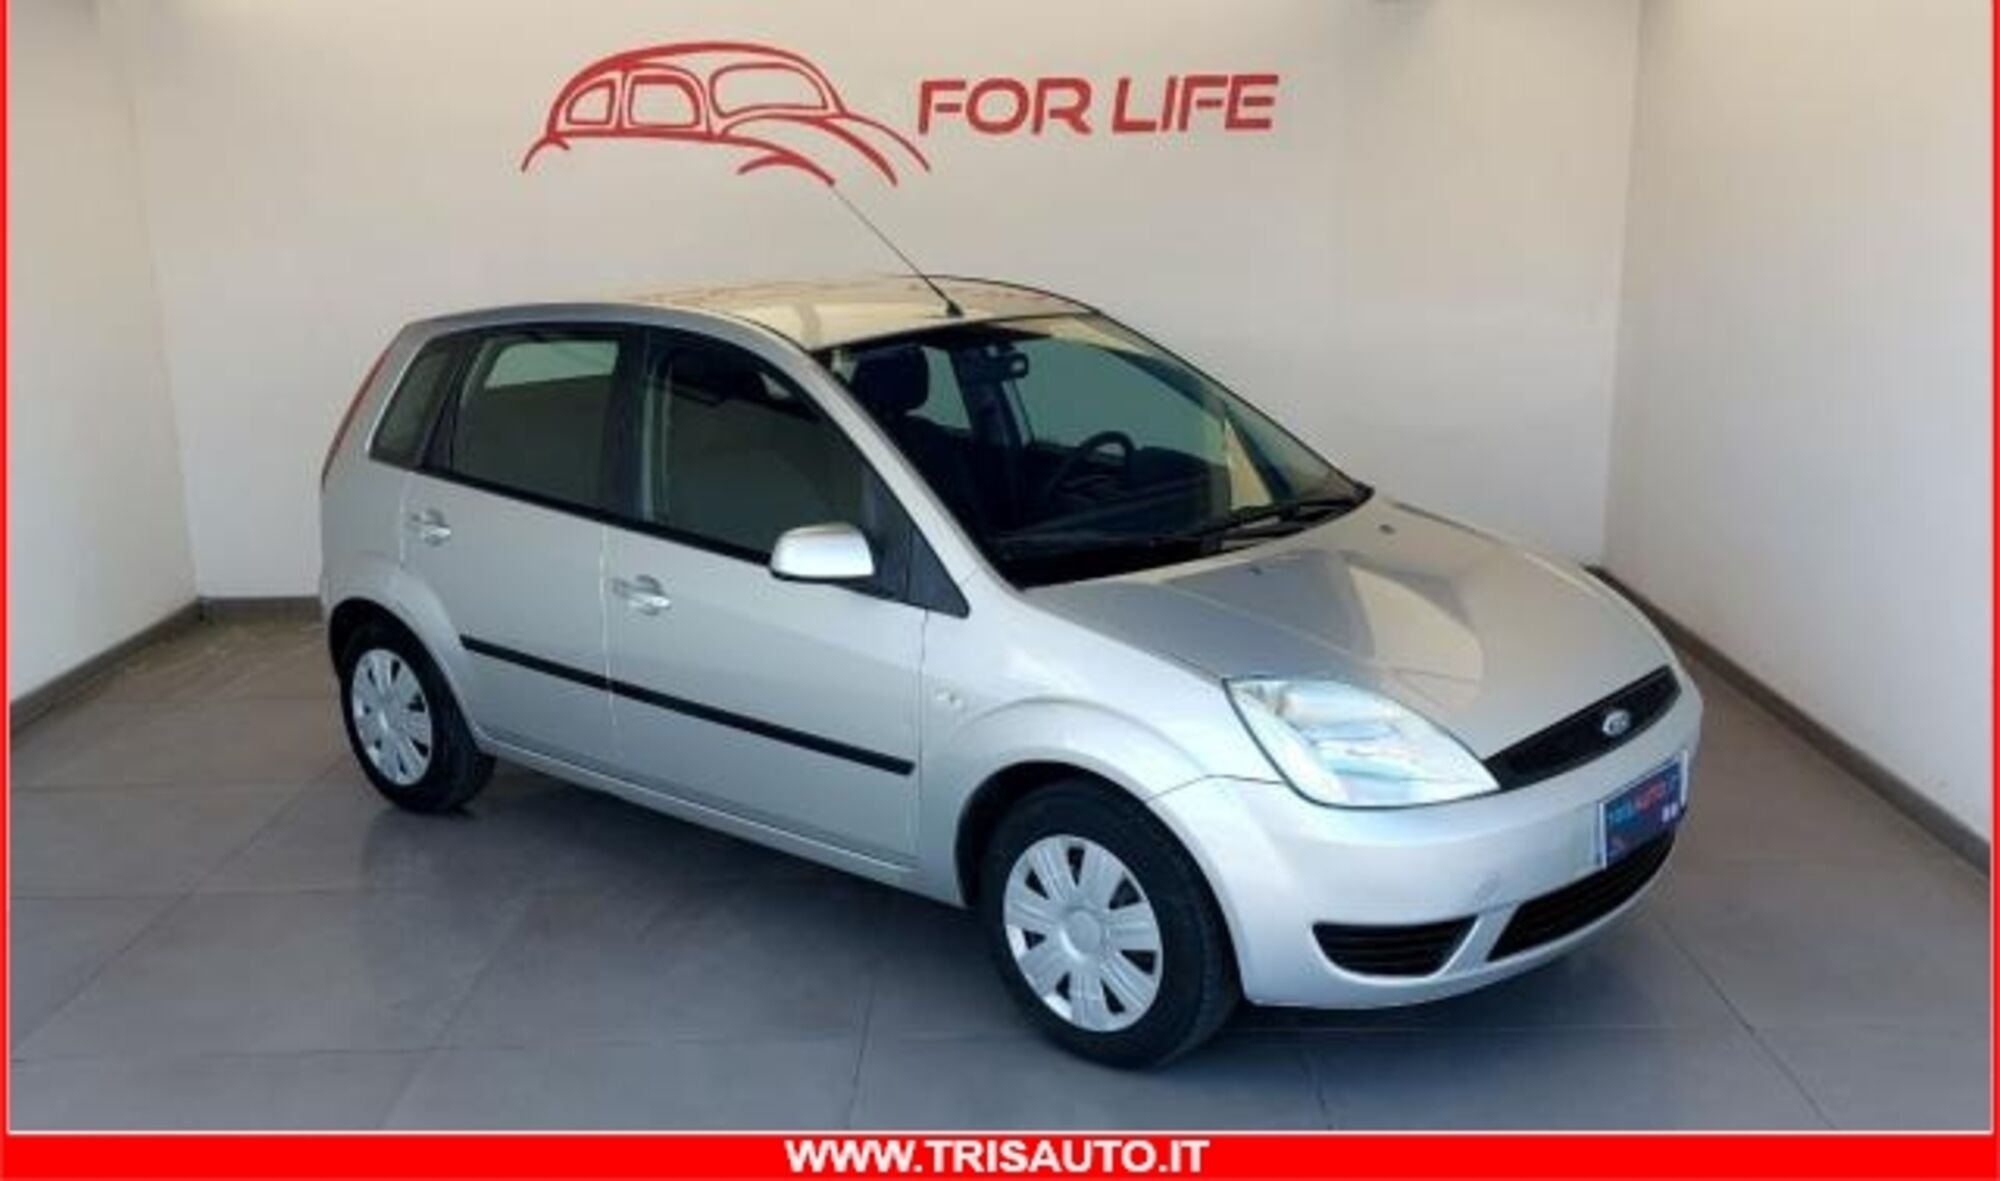 Ford Fiesta 1.4 TDCi 5p. Collection usato